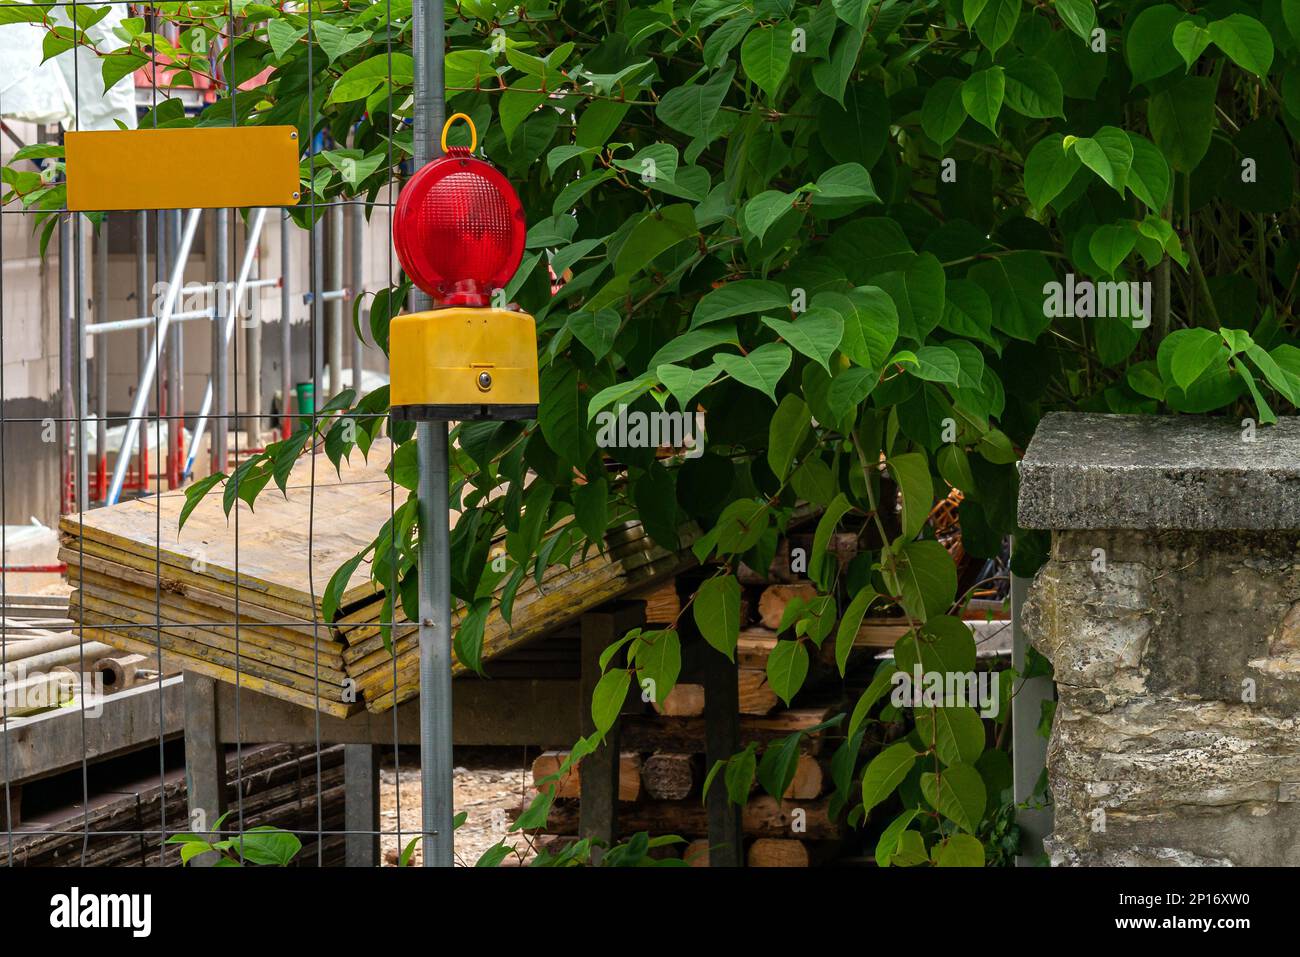 Street barricade with warning signal lamp on a fence. Construction safety. Stock Photo